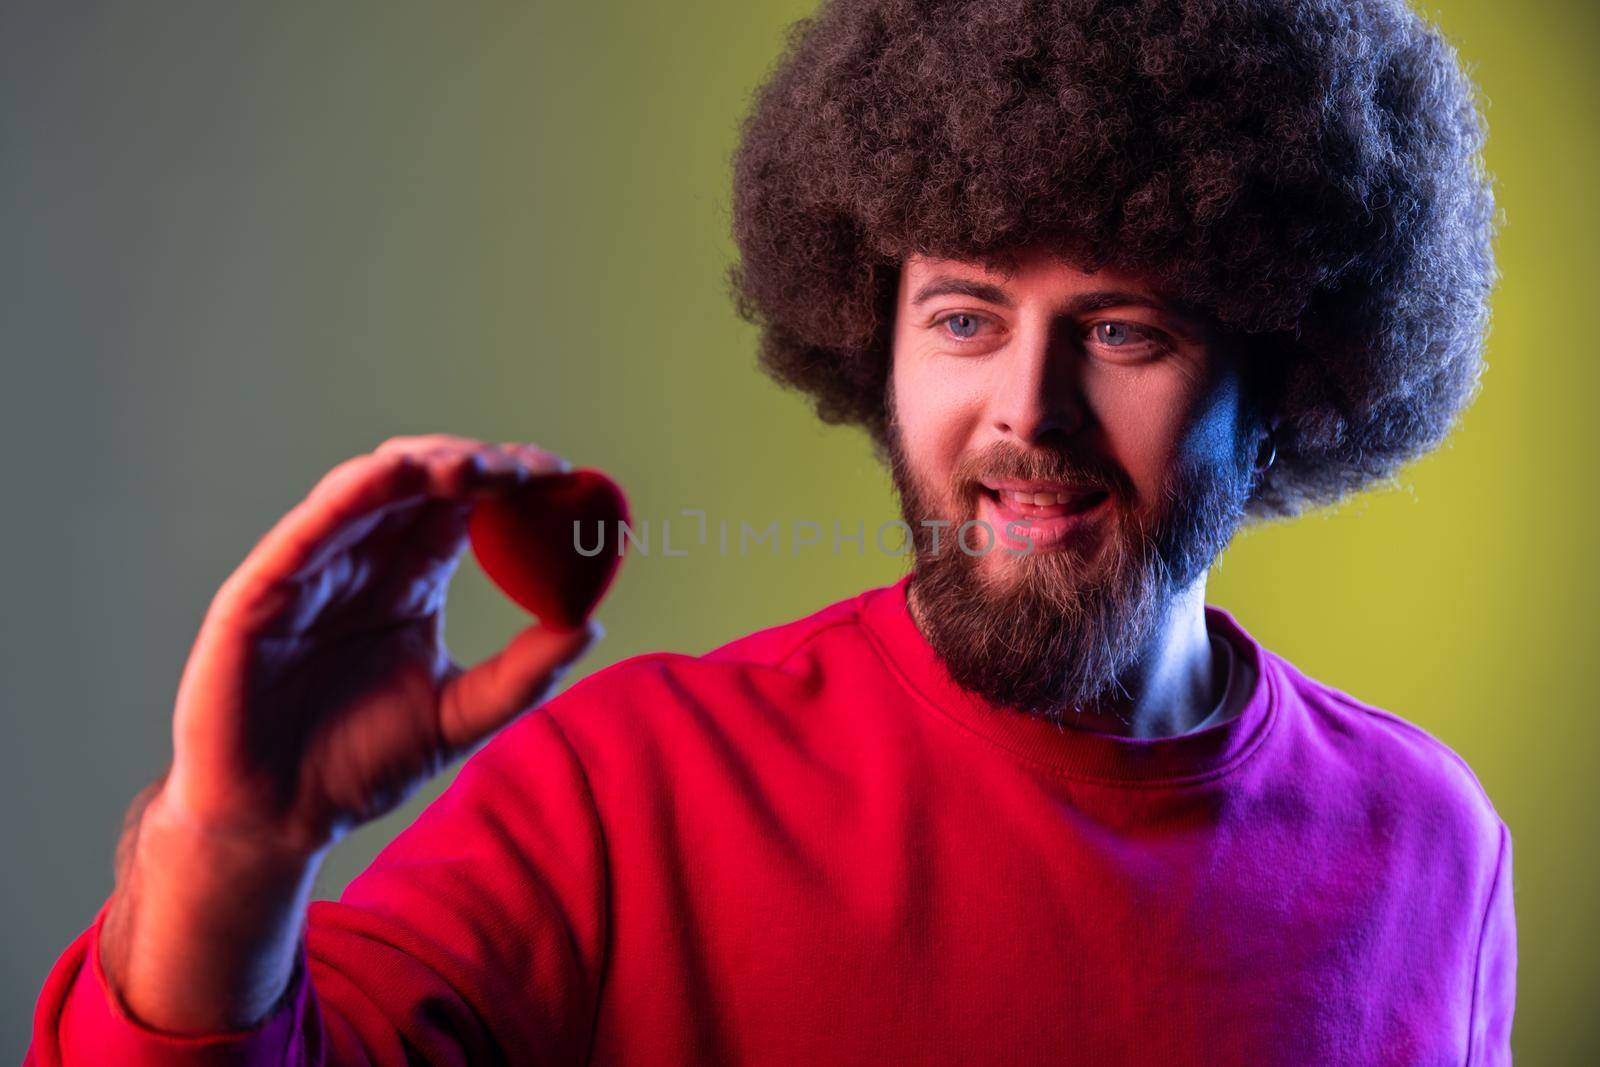 Portrait of hipster man with Afro hairstyle holding in hands little red heart confessing his love, romantic relationships. Indoor studio shot isolated on colorful neon light background.